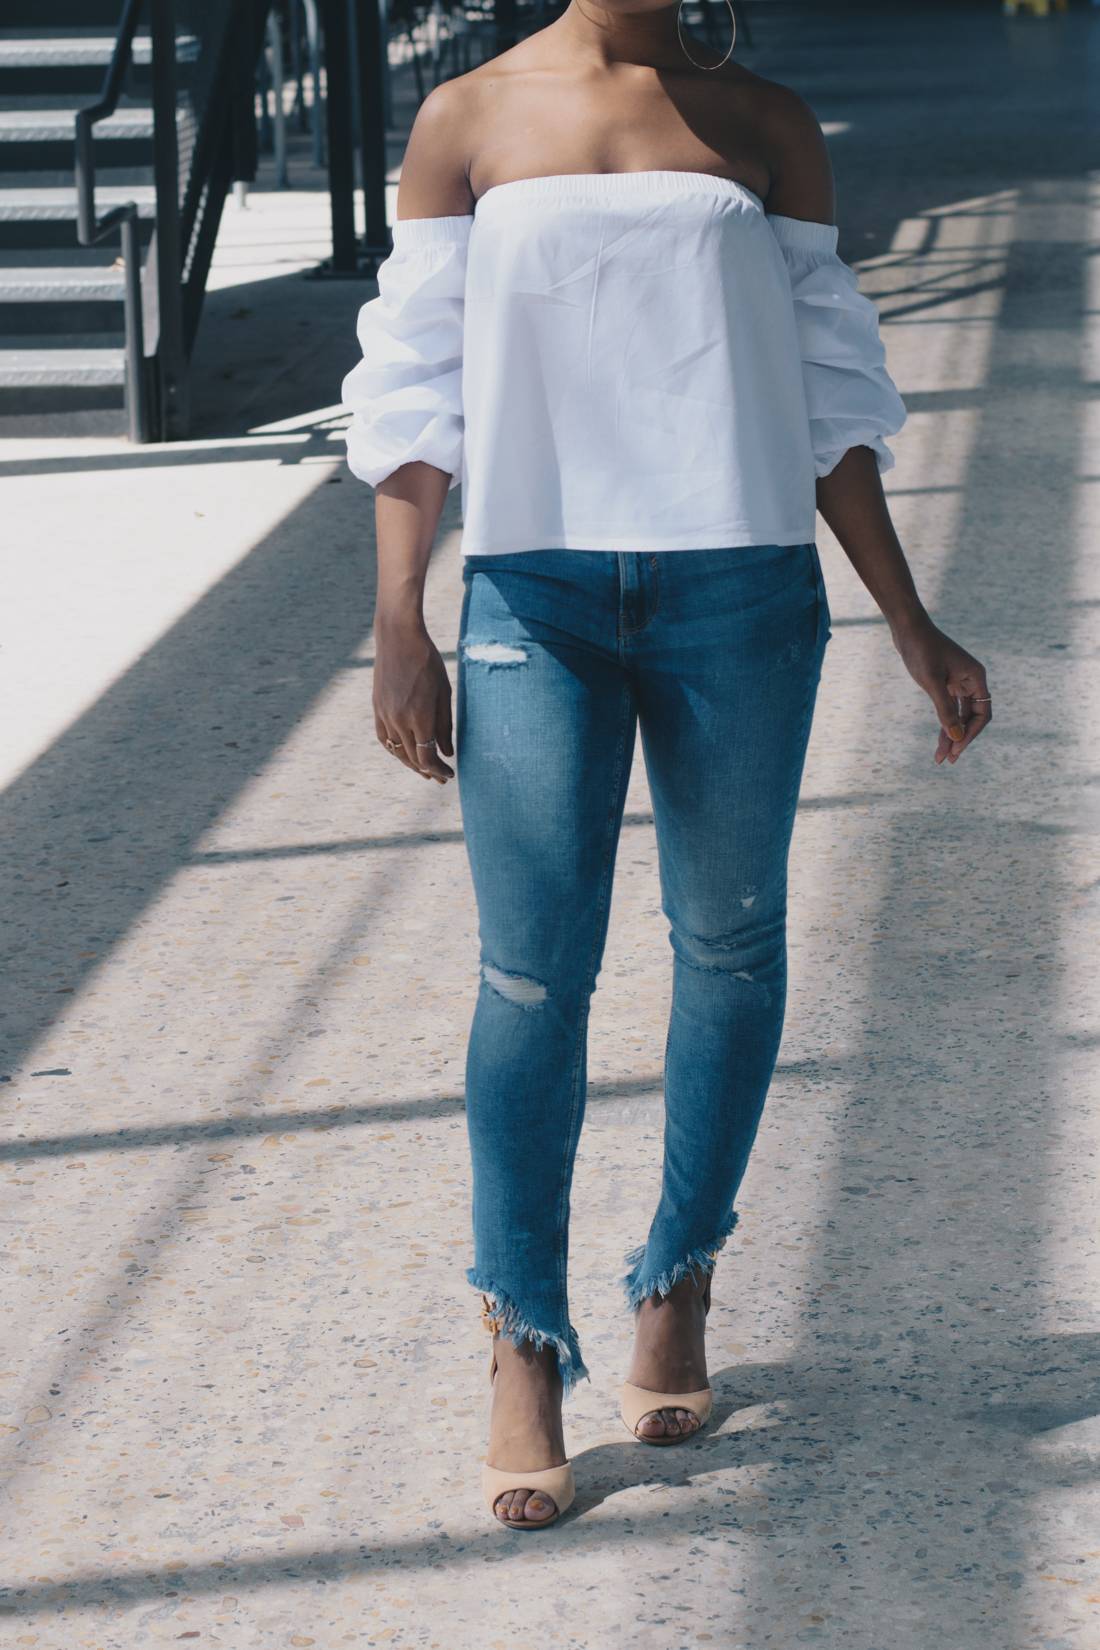 Ripped Hem Jeans and Off teh Shoulder Top-2 - Venti Fashion